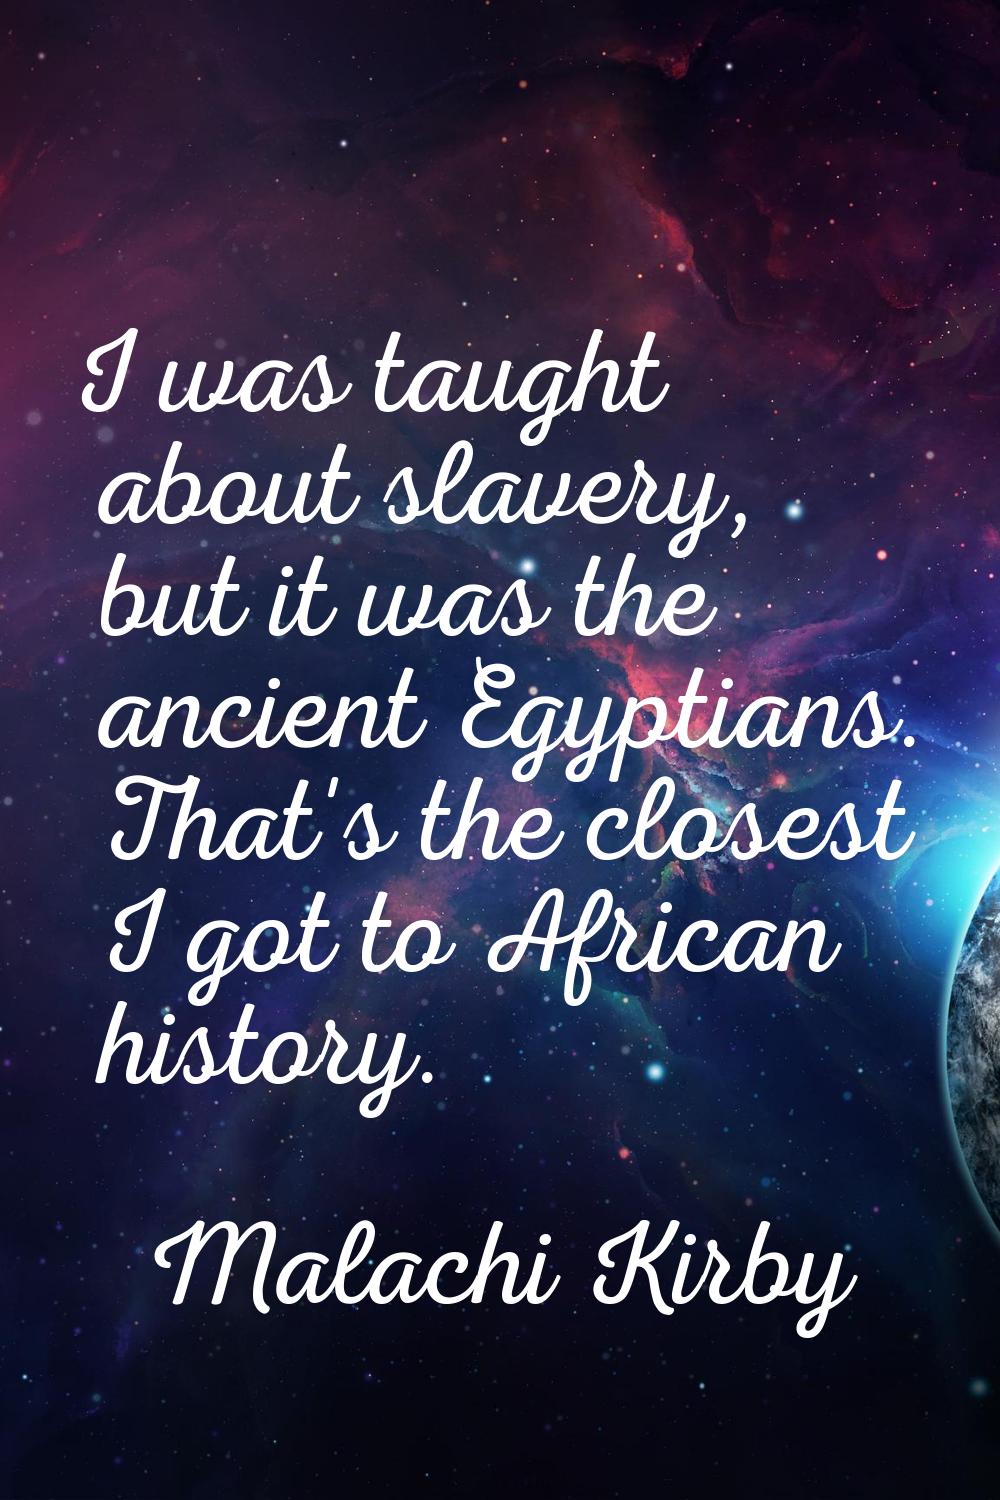 I was taught about slavery, but it was the ancient Egyptians. That's the closest I got to African h